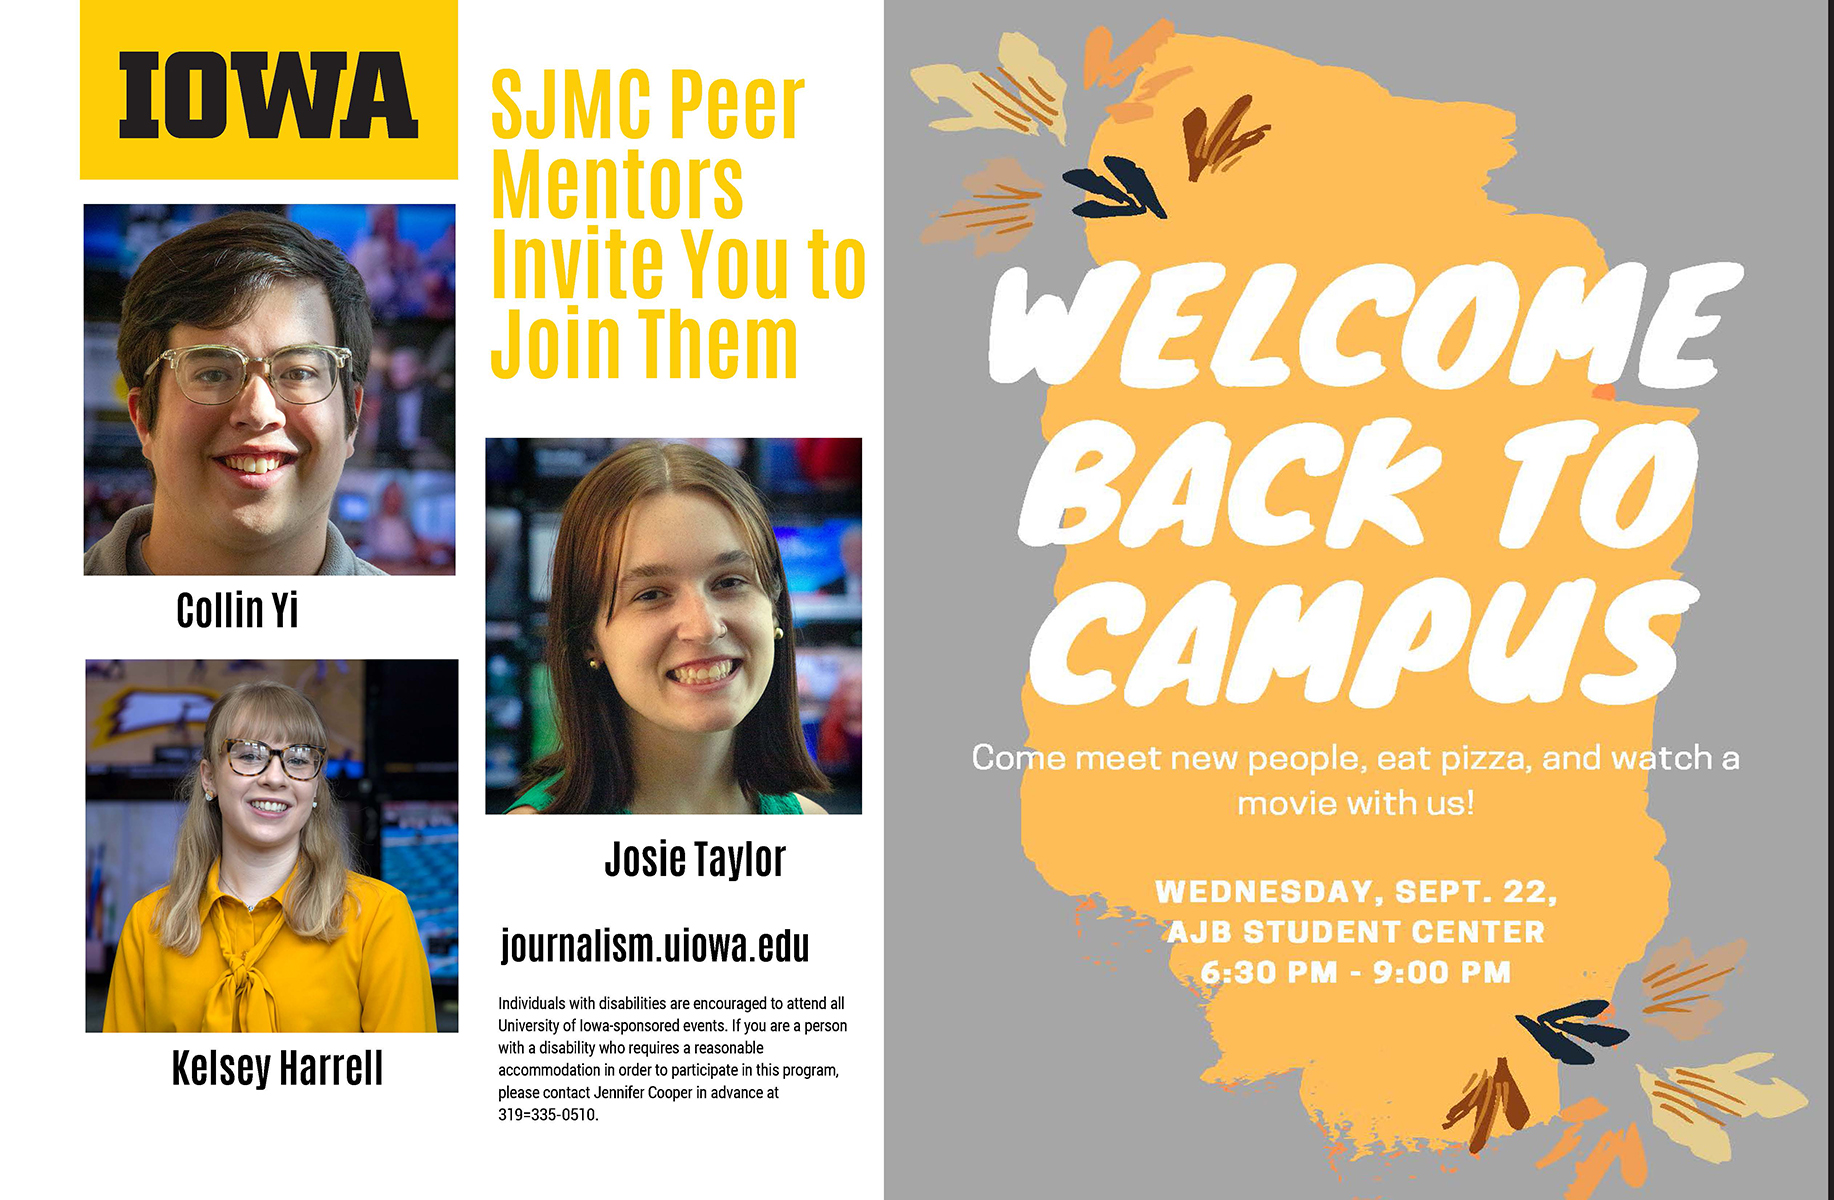 SJMC Student Mentors invite you to a Welcome Back to Campus event Wednesday Sept 22